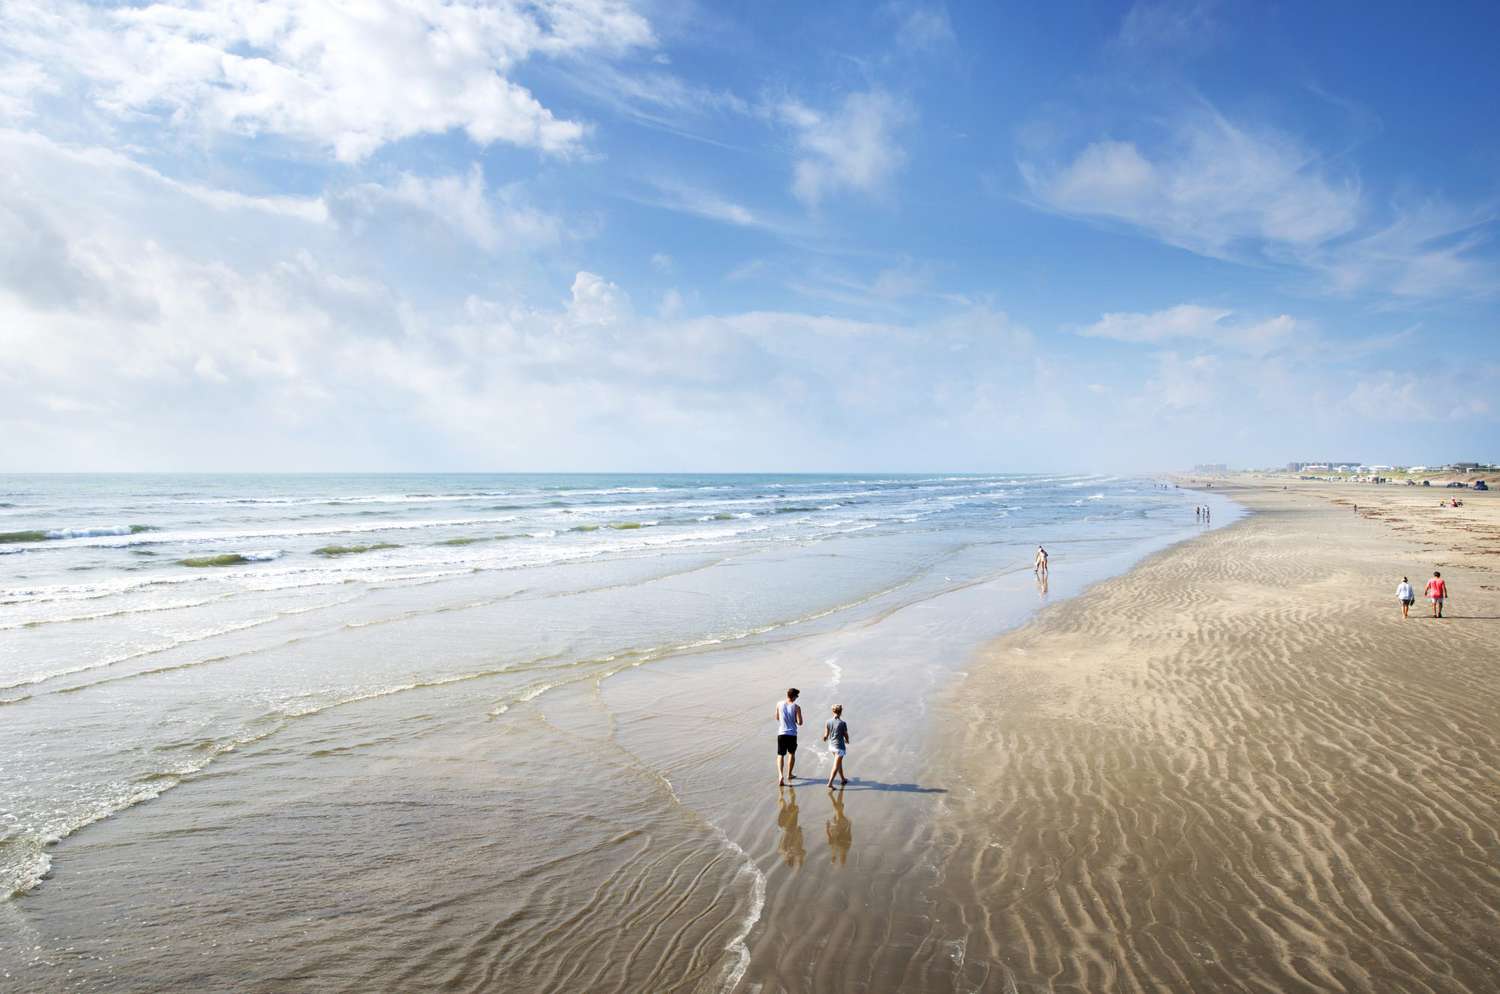 Check Out Our Top 5 Local Tourist Hot Spots in Port Aransas